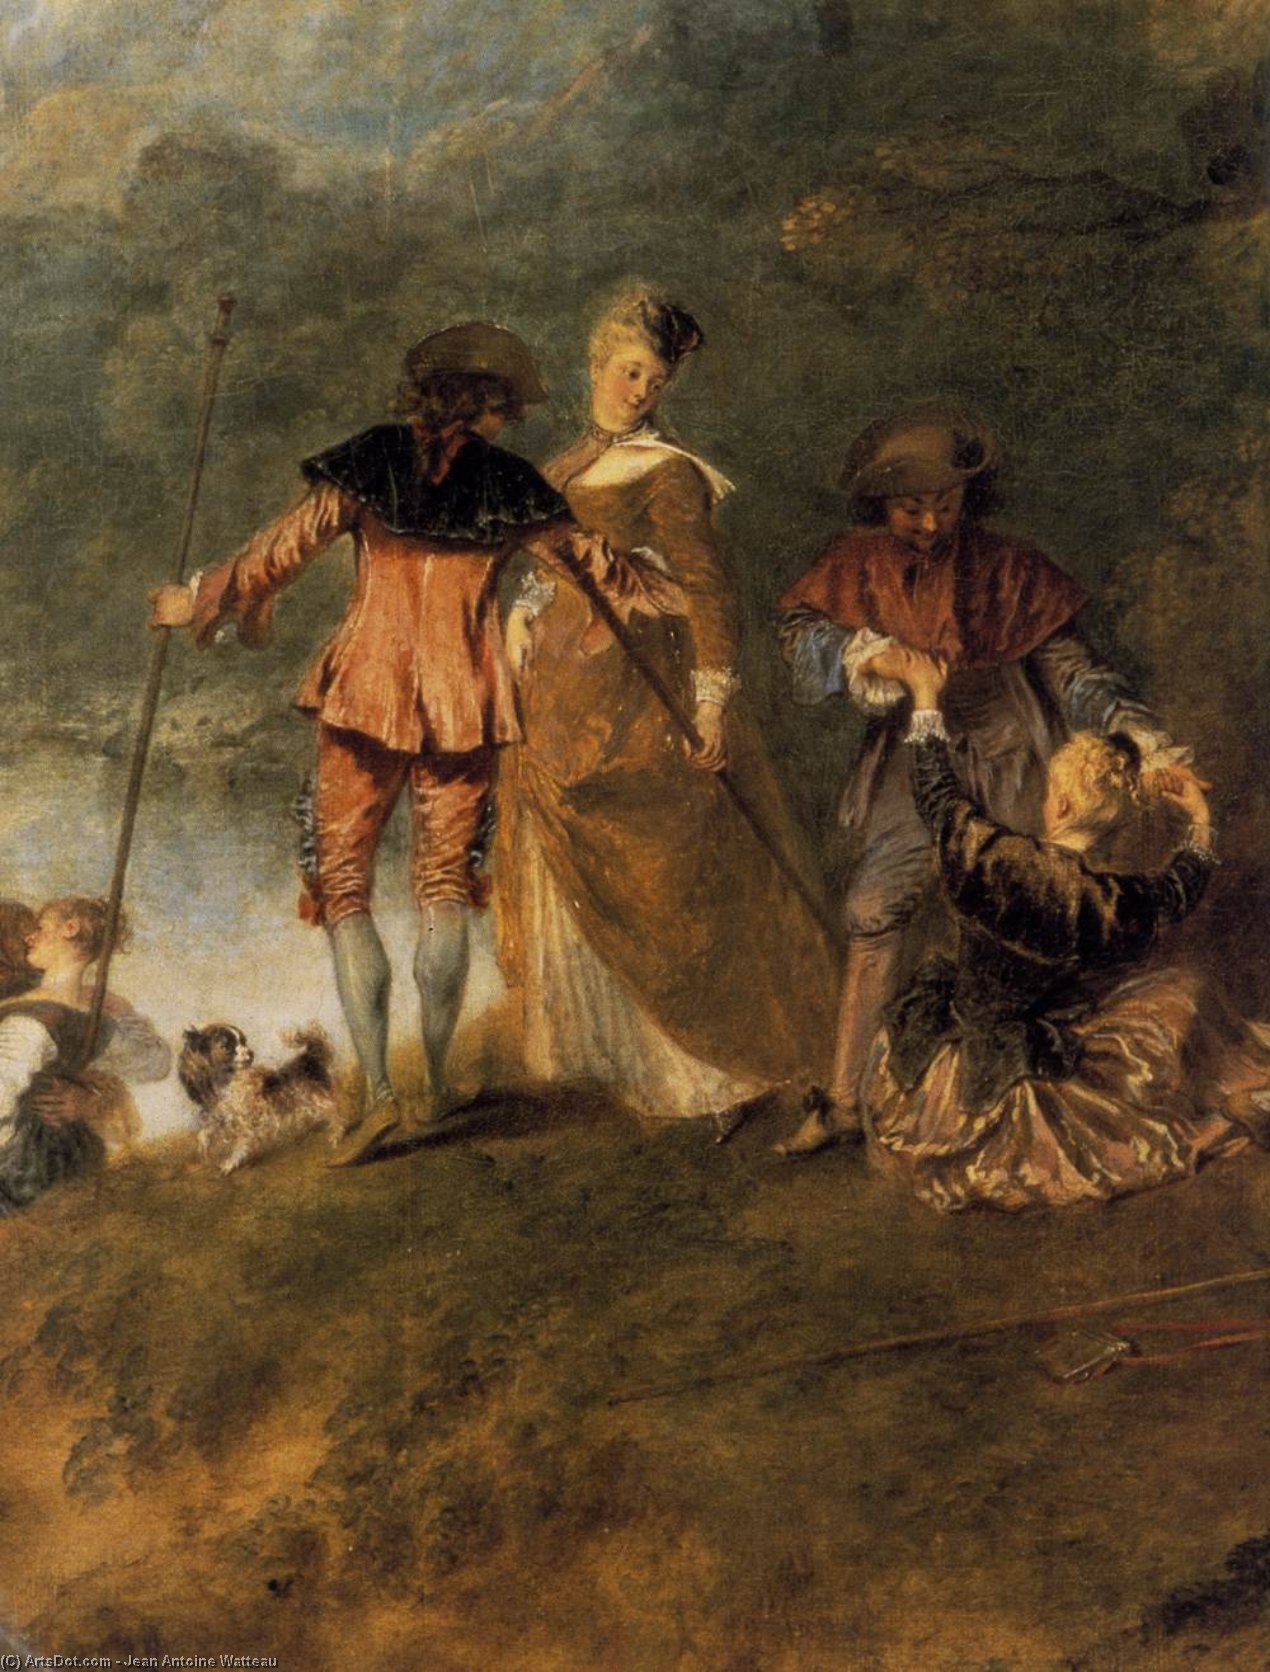 WikiOO.org - 백과 사전 - 회화, 삽화 Jean Antoine Watteau - The Embarkation for Cythera (detail)